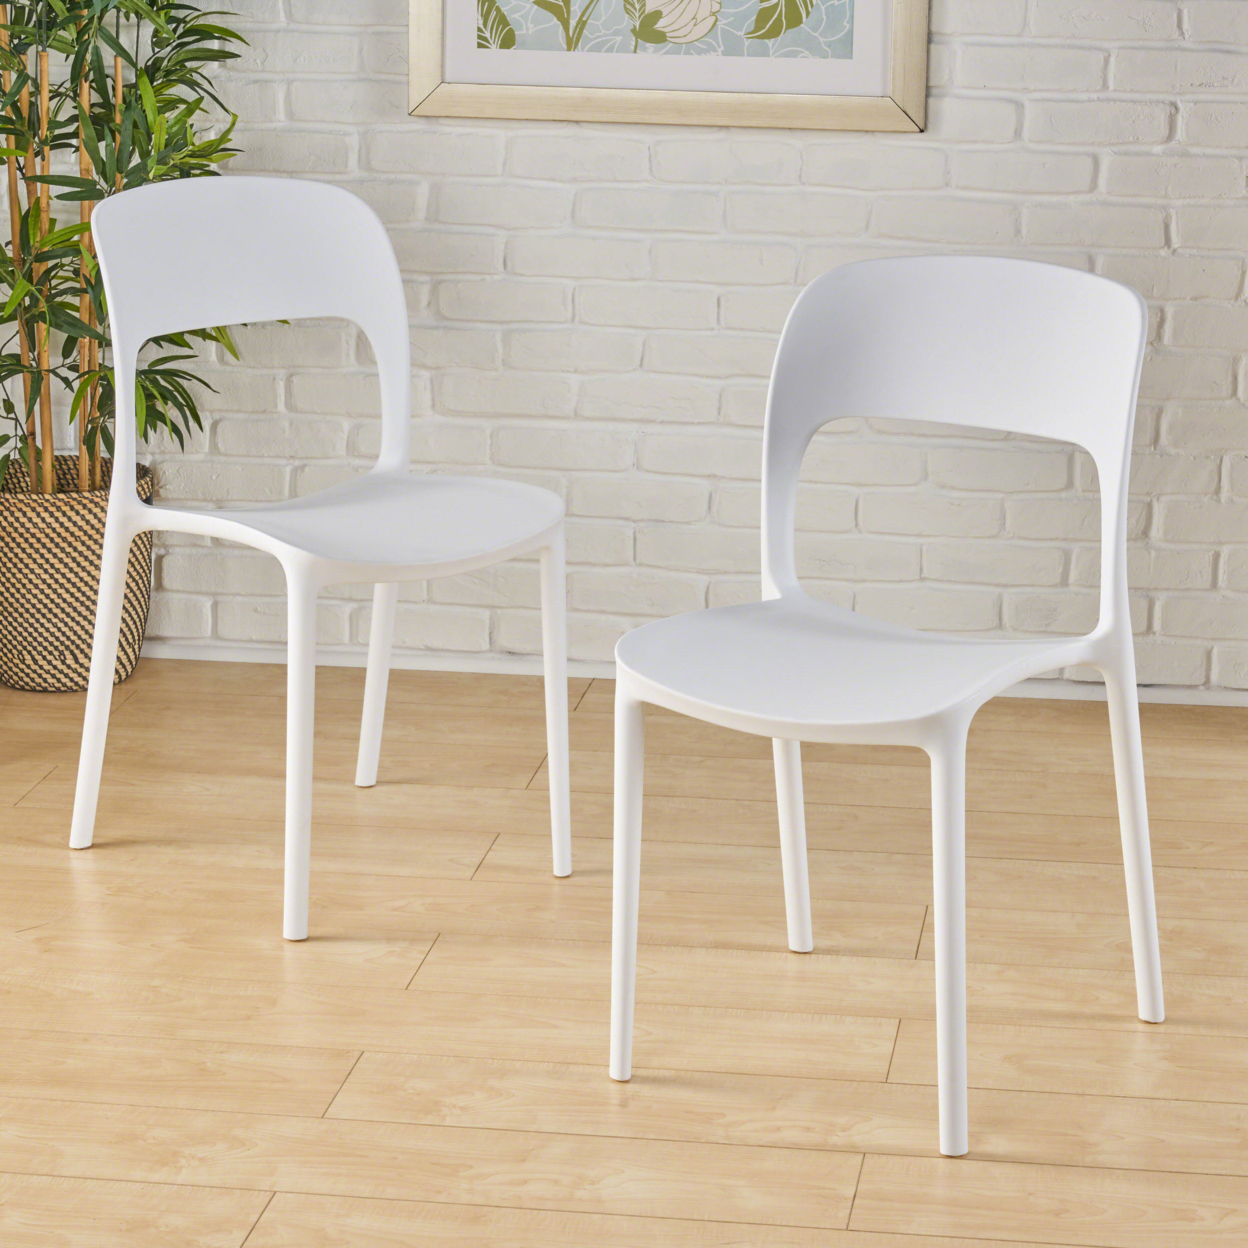 Funnel Indoor Plastic Chair (Set Of 2) - White